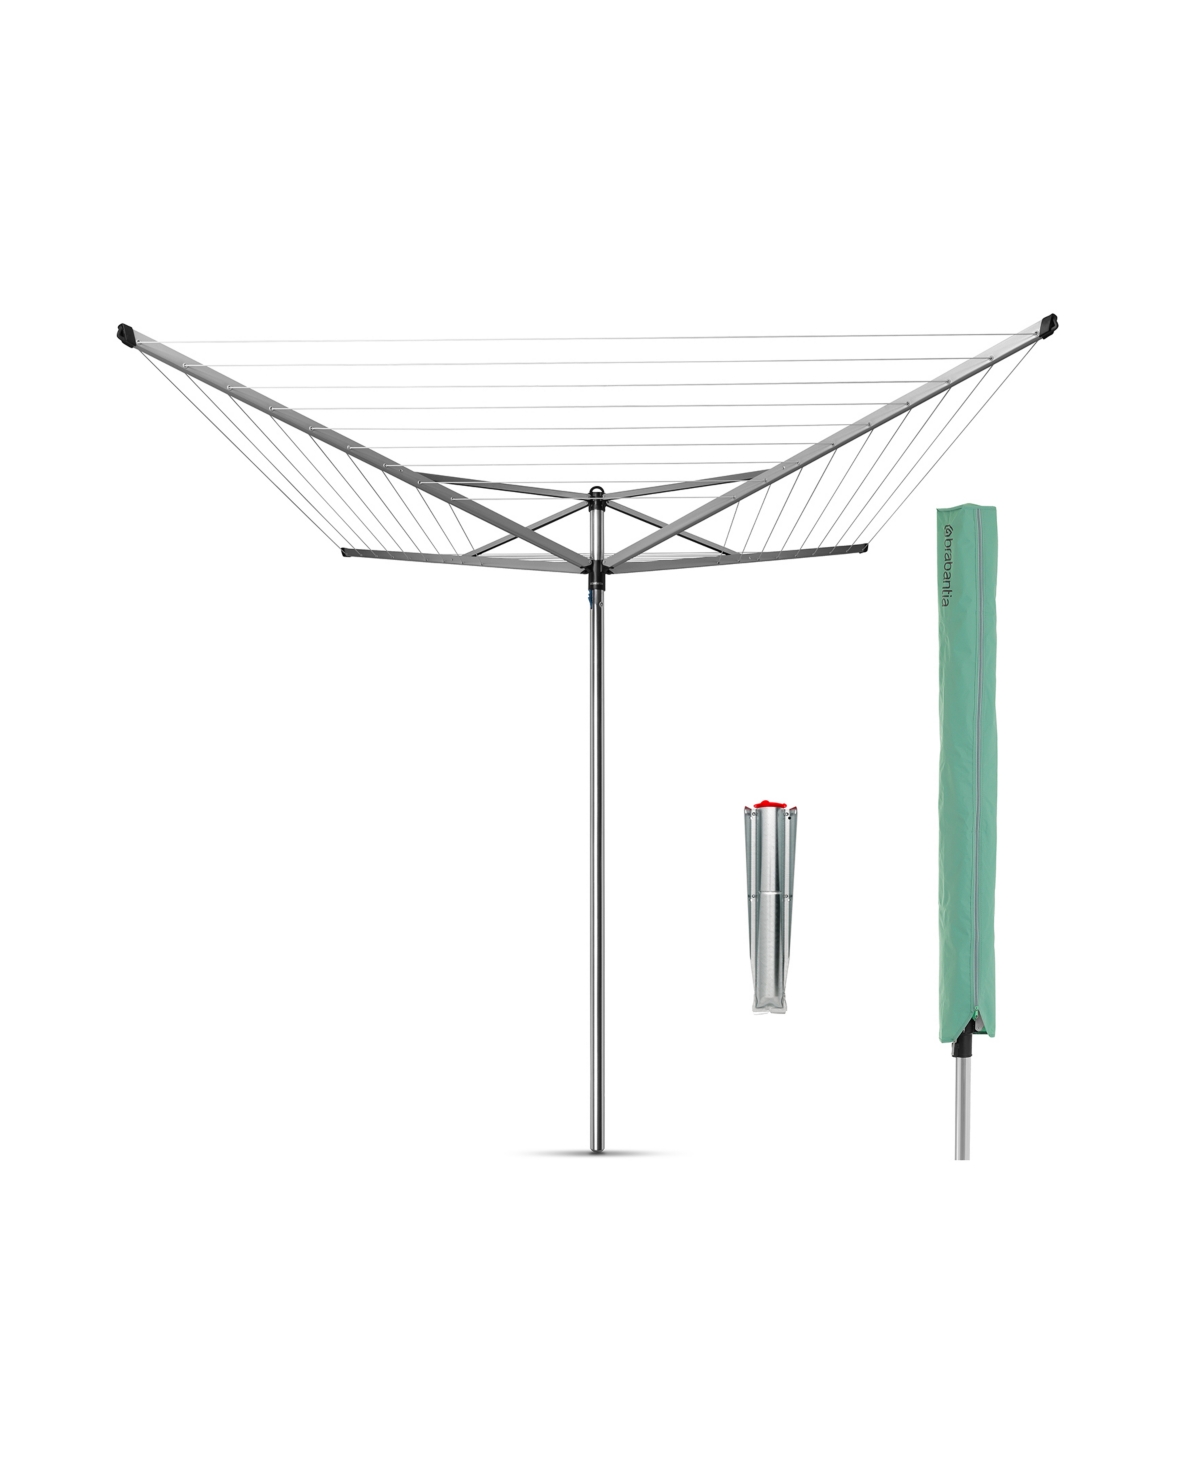 Rotary Top Spinner Clothesline - 164', 50 Meter with Metal Ground Spike and Protective Cover Set - Metallic Gray